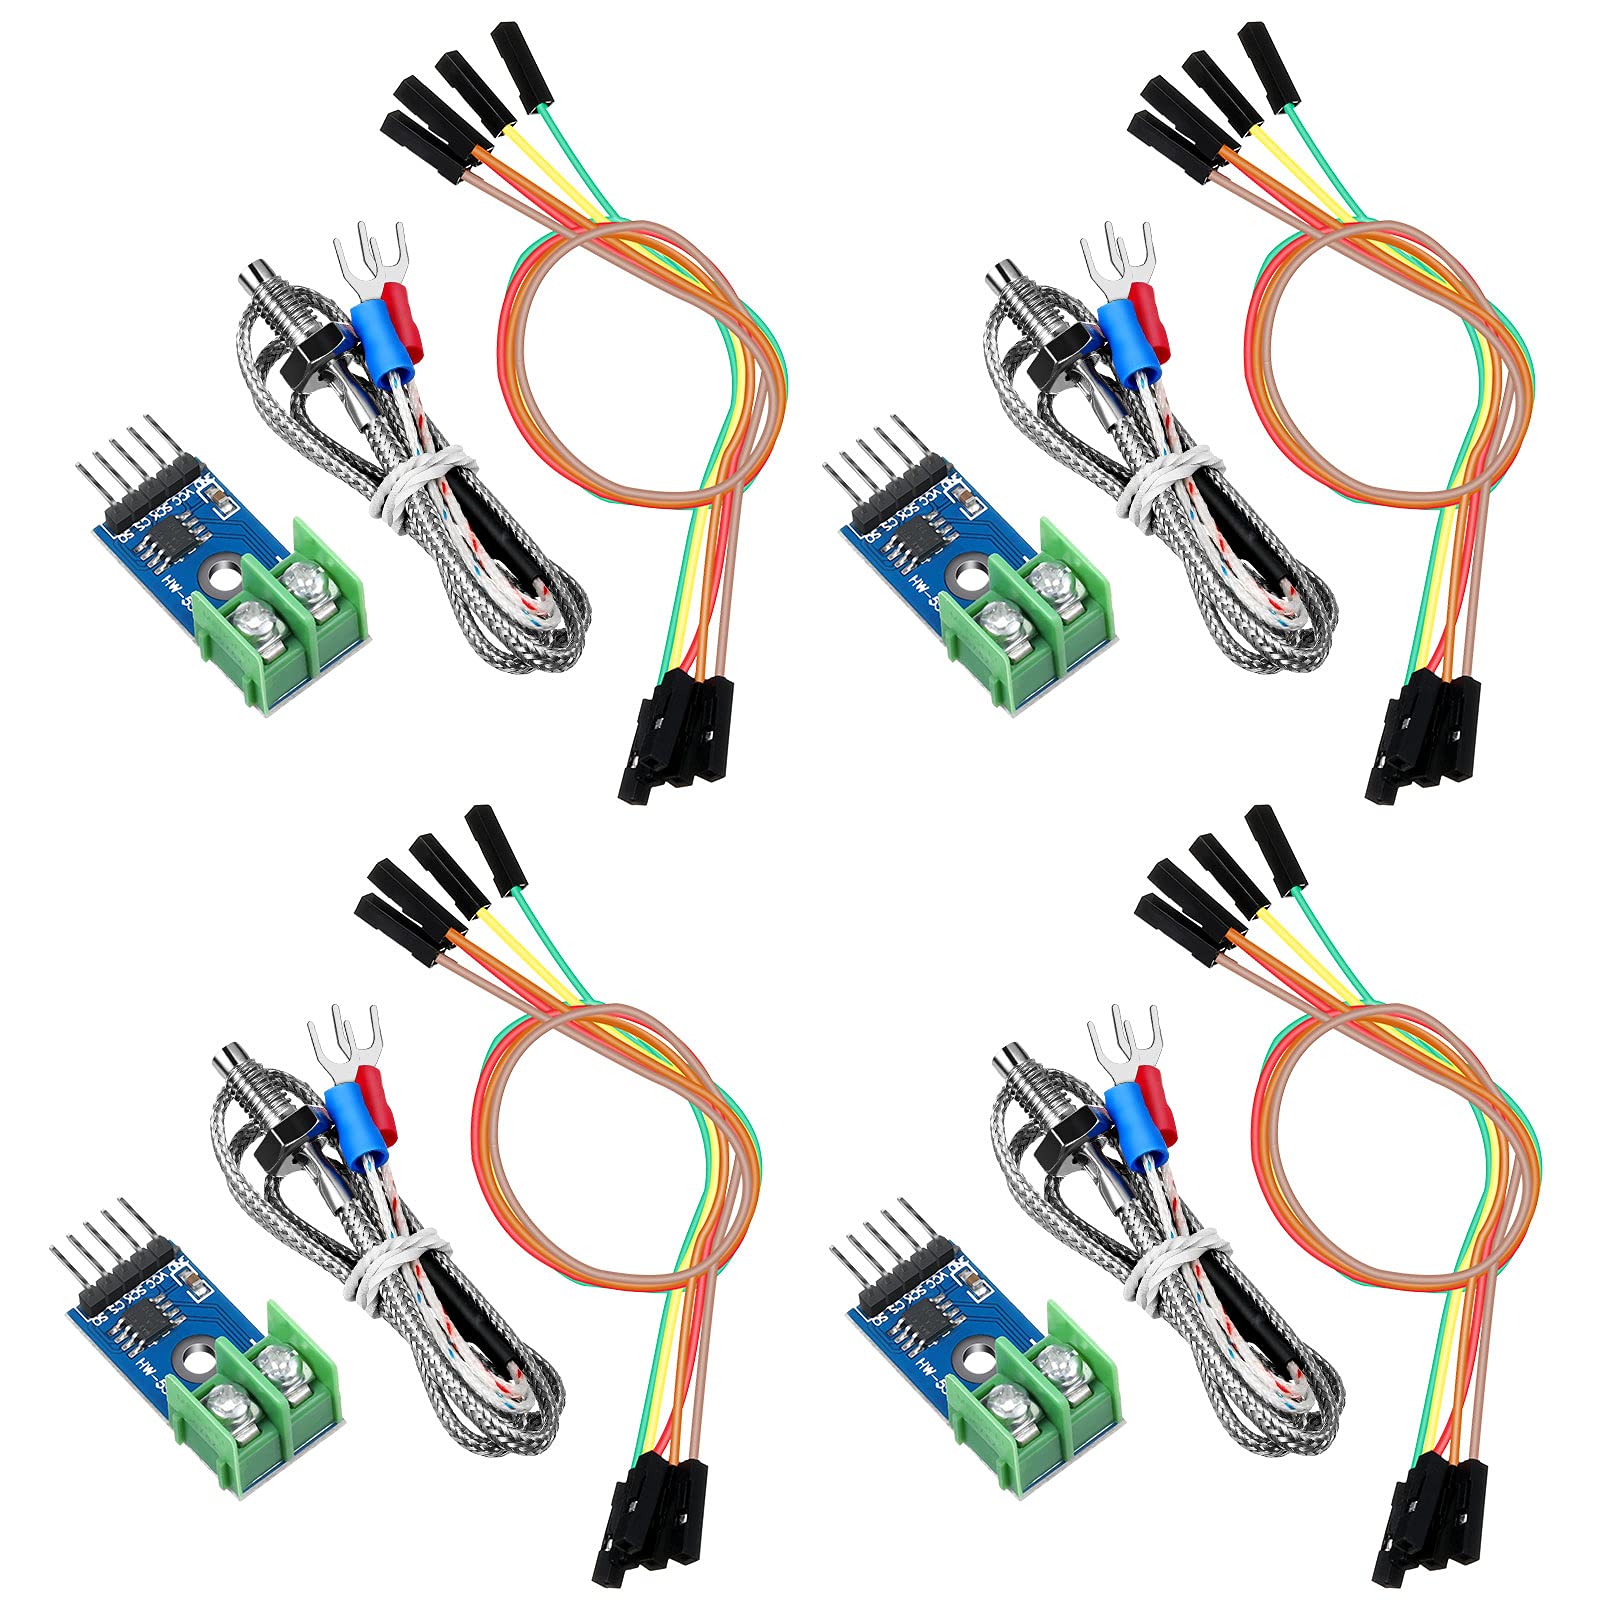 Weewooday 4 Sets Direct Current 3-5v Max6675 Themocouple Module and K Type Thermocouple Temperature Sensor Thermocouple Sensor Set M6 Screw with Cable Cord Compatible with Arduino/Raspberry Pi